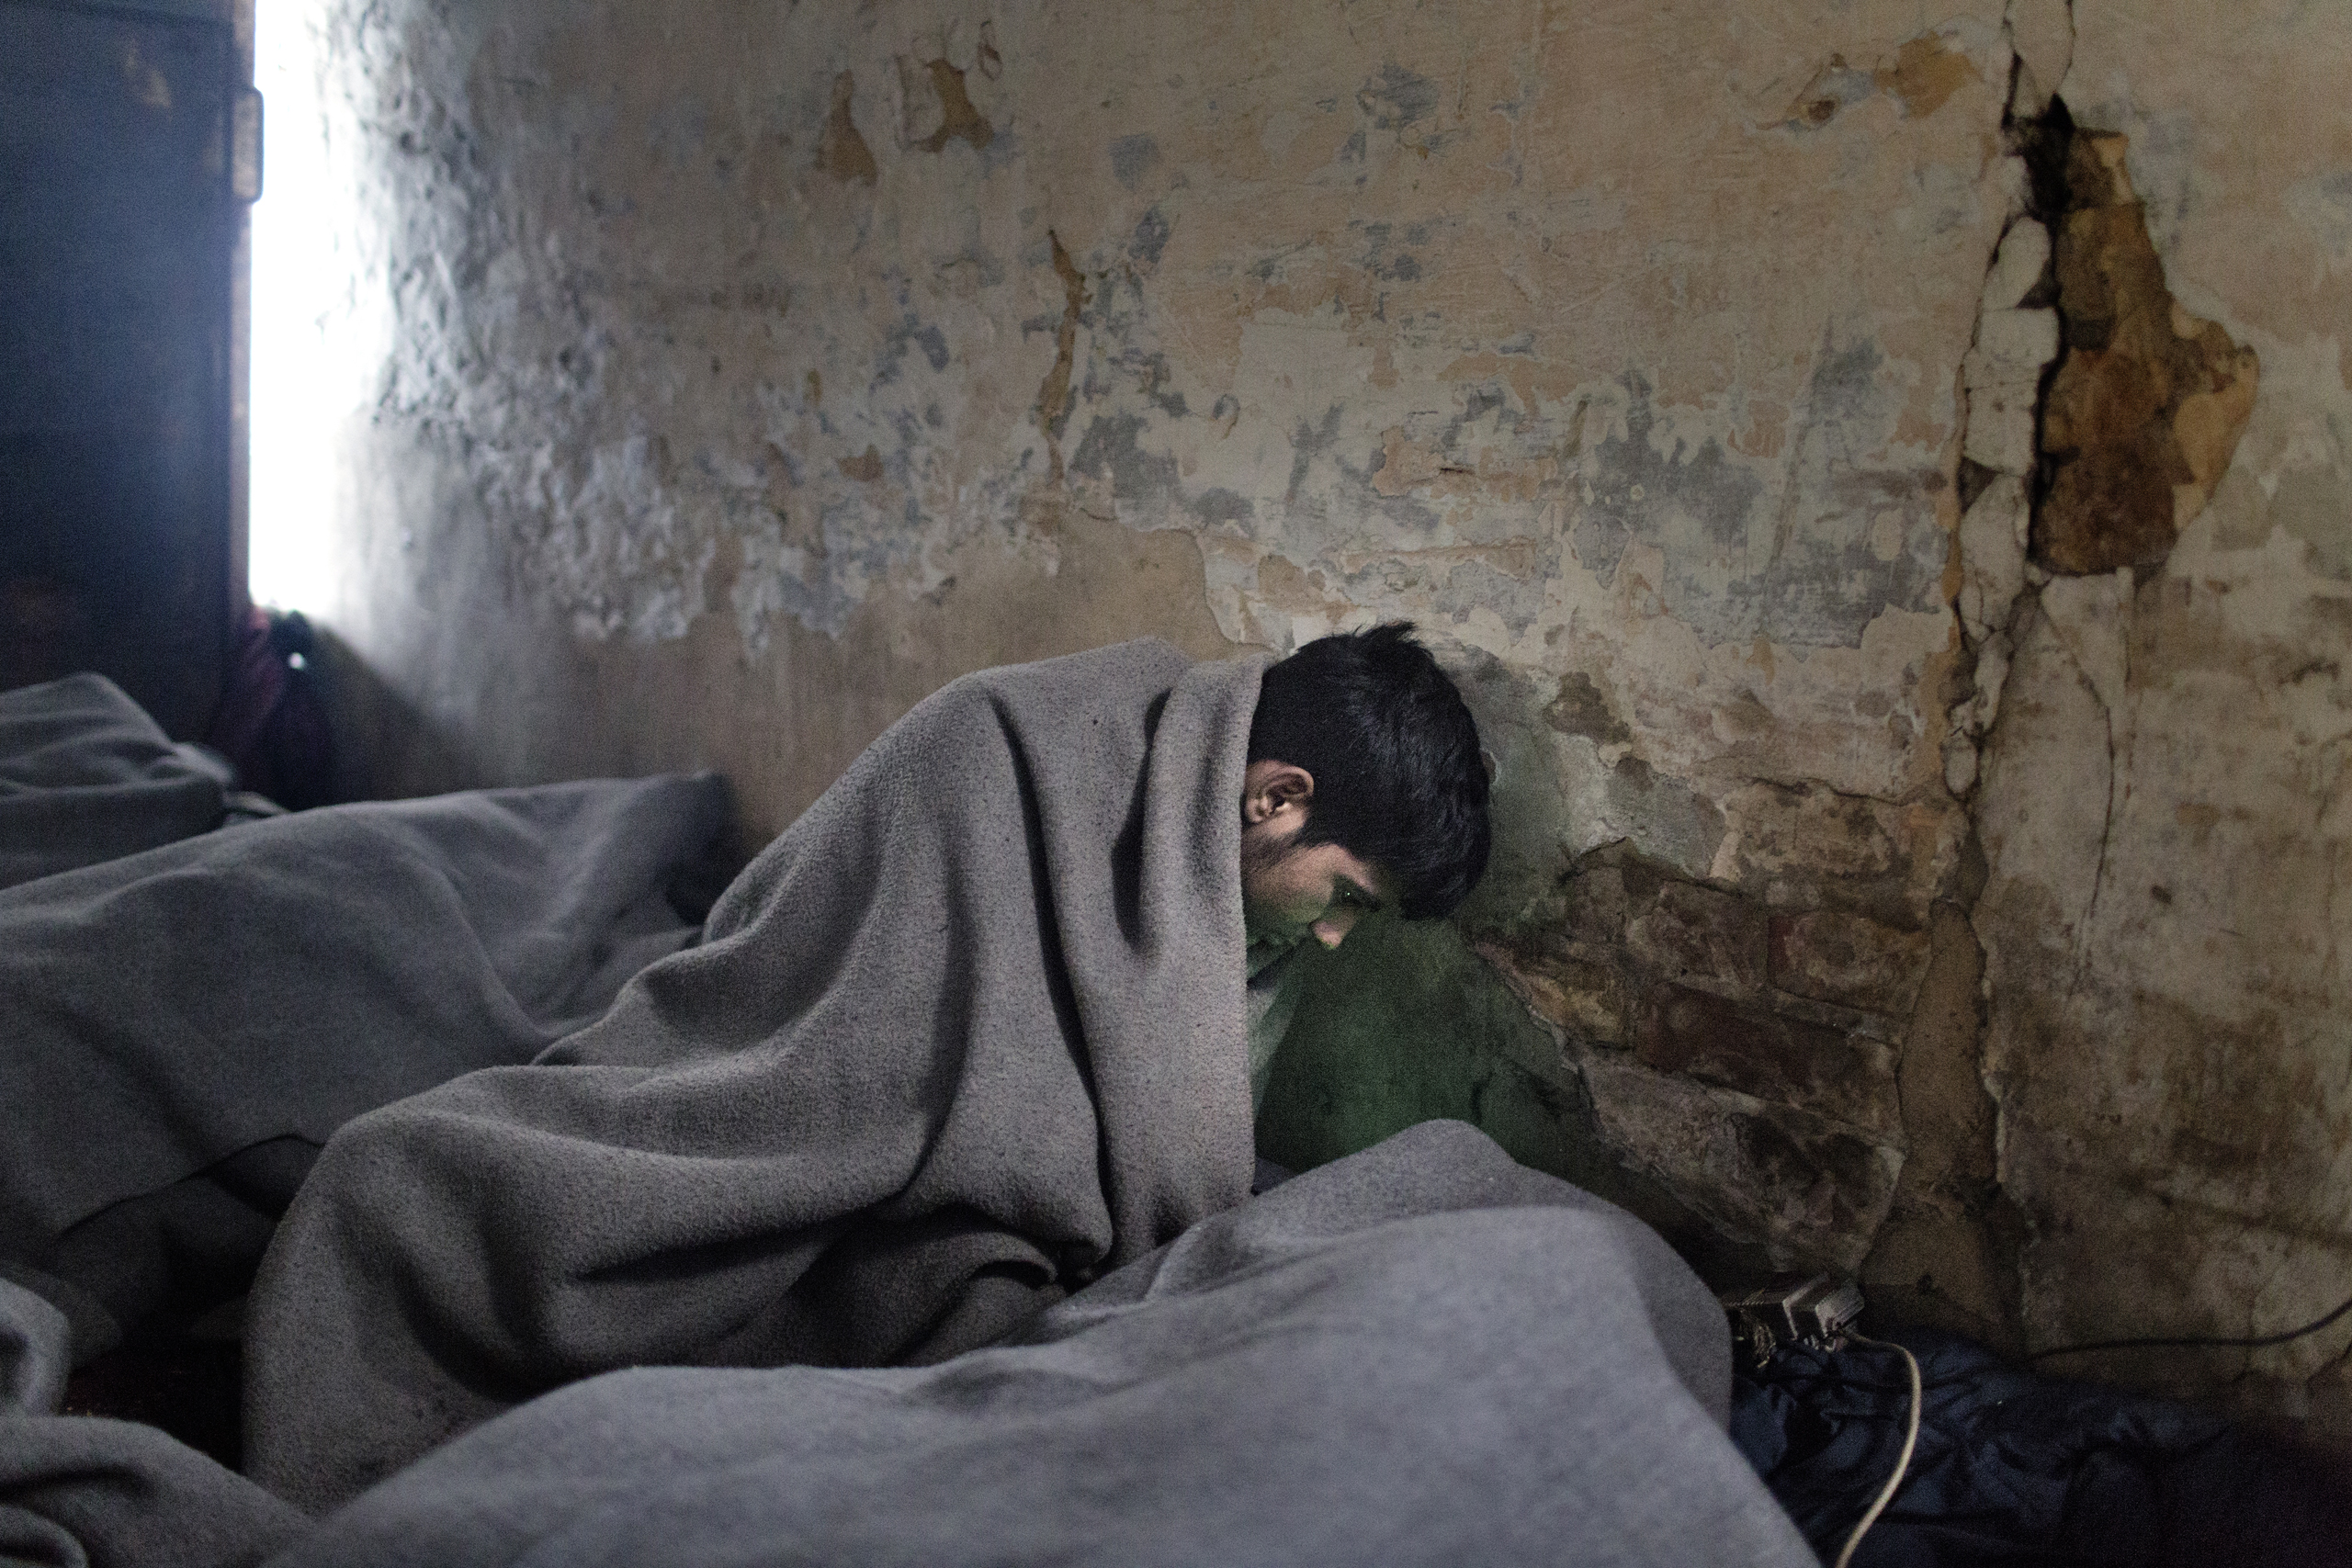 A group of unaccompanied minors from Afghanistan wait in an abandoned warehouse in Belgrade, Serbia. They hope smugglers will help them reach Europe, Jan 13, 2017.